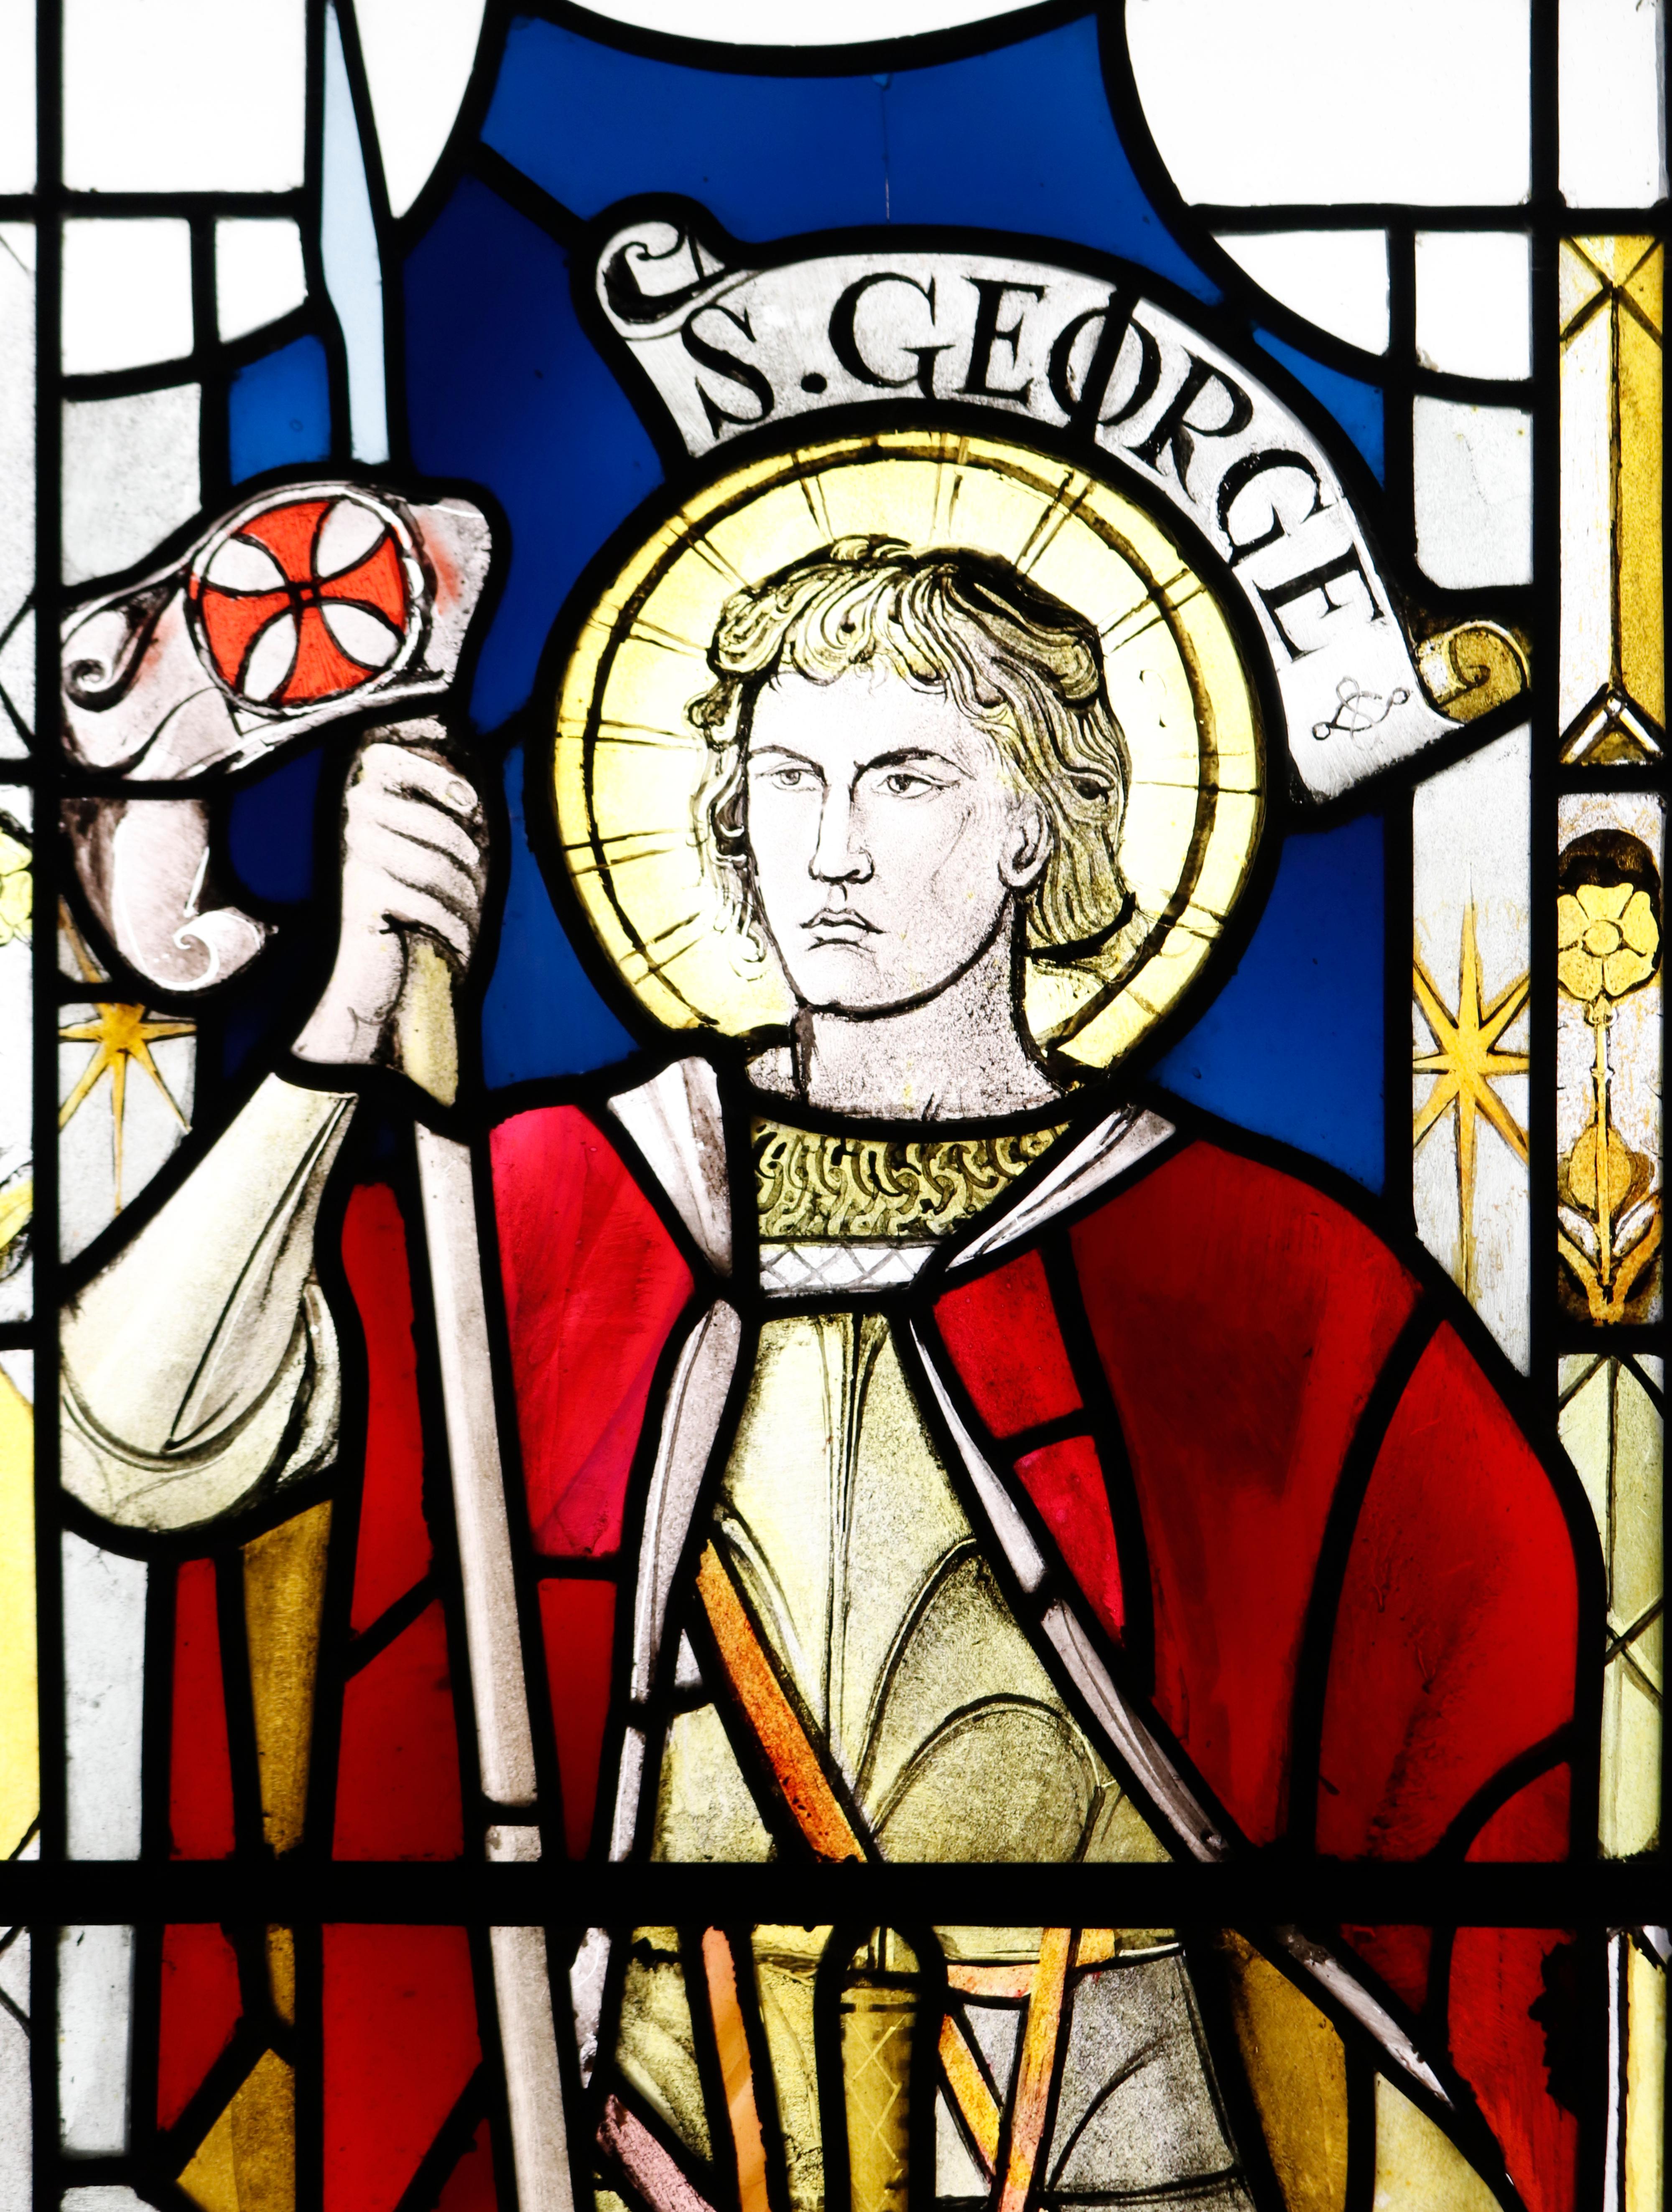 Antique stained glass window of St George.
An original and unrestored stained glass window or panel depicting St George. Dressed in armour, he can be seen equipped with a sword and shield. St George was made famous by his slaying of a dragon on the